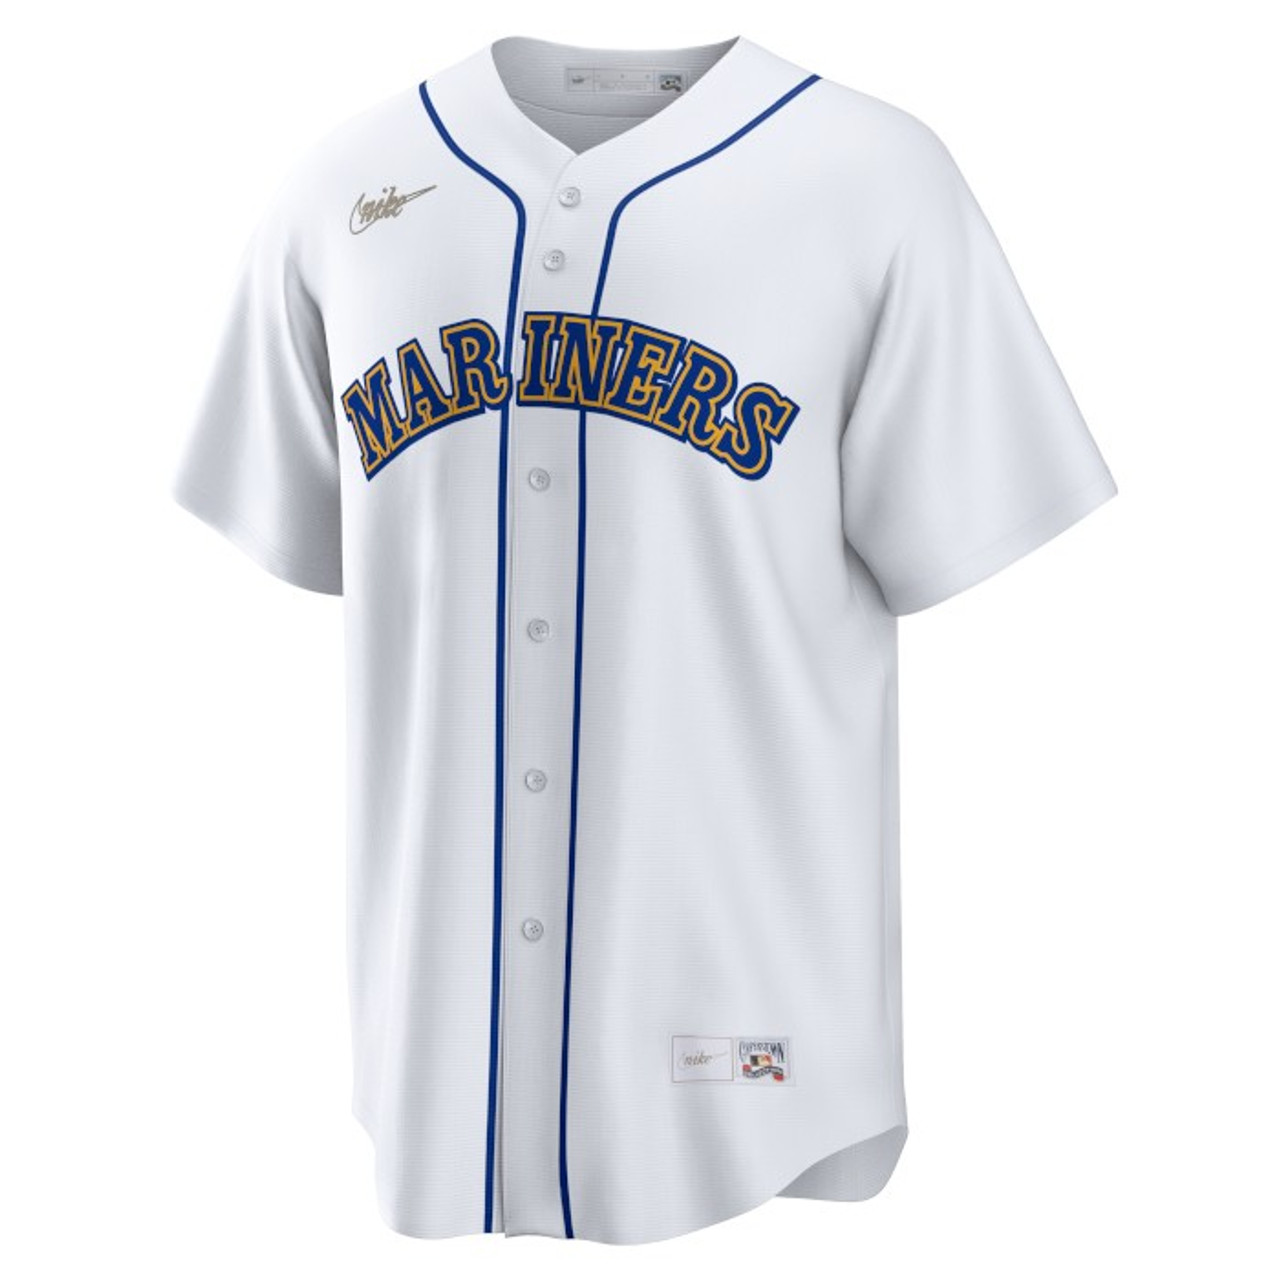 Men’s Nike Edgar Martinez Seattle Mariners Cooperstown Collection White  Jersey